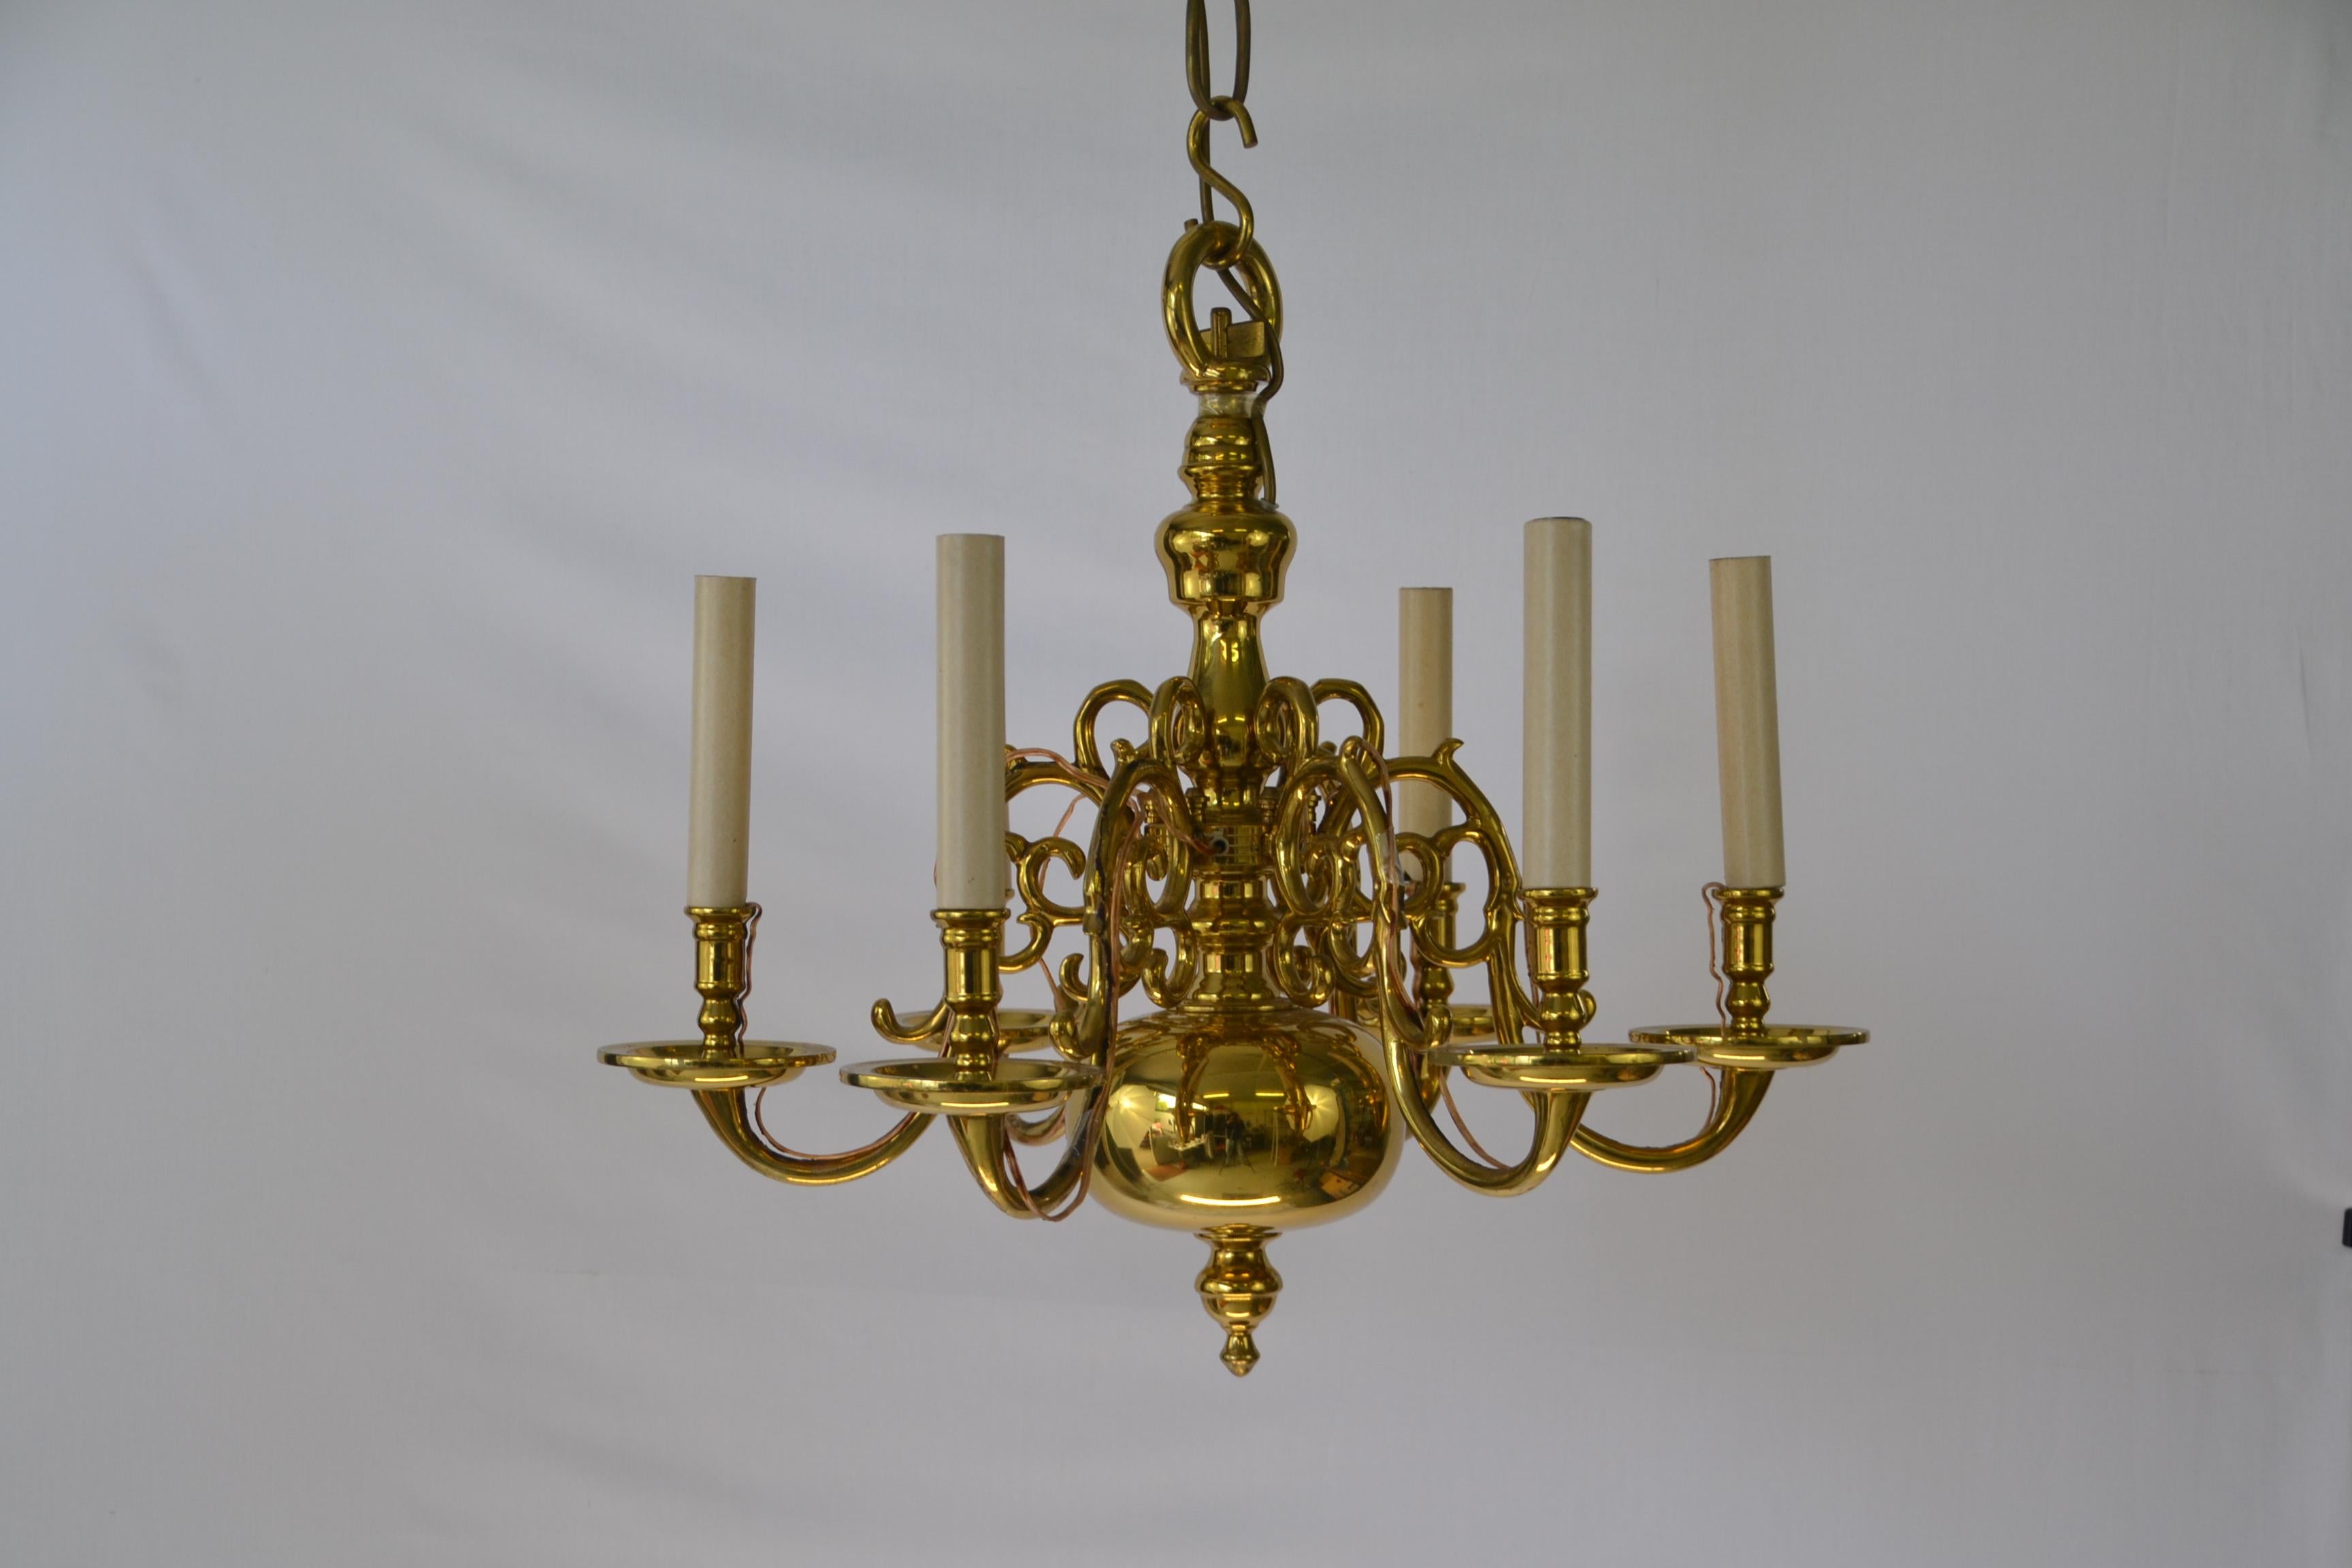 1 Tier 17th Century Electric Model Dutch Brass Chandelier with 6 Lights H54xW57 For Sale 1